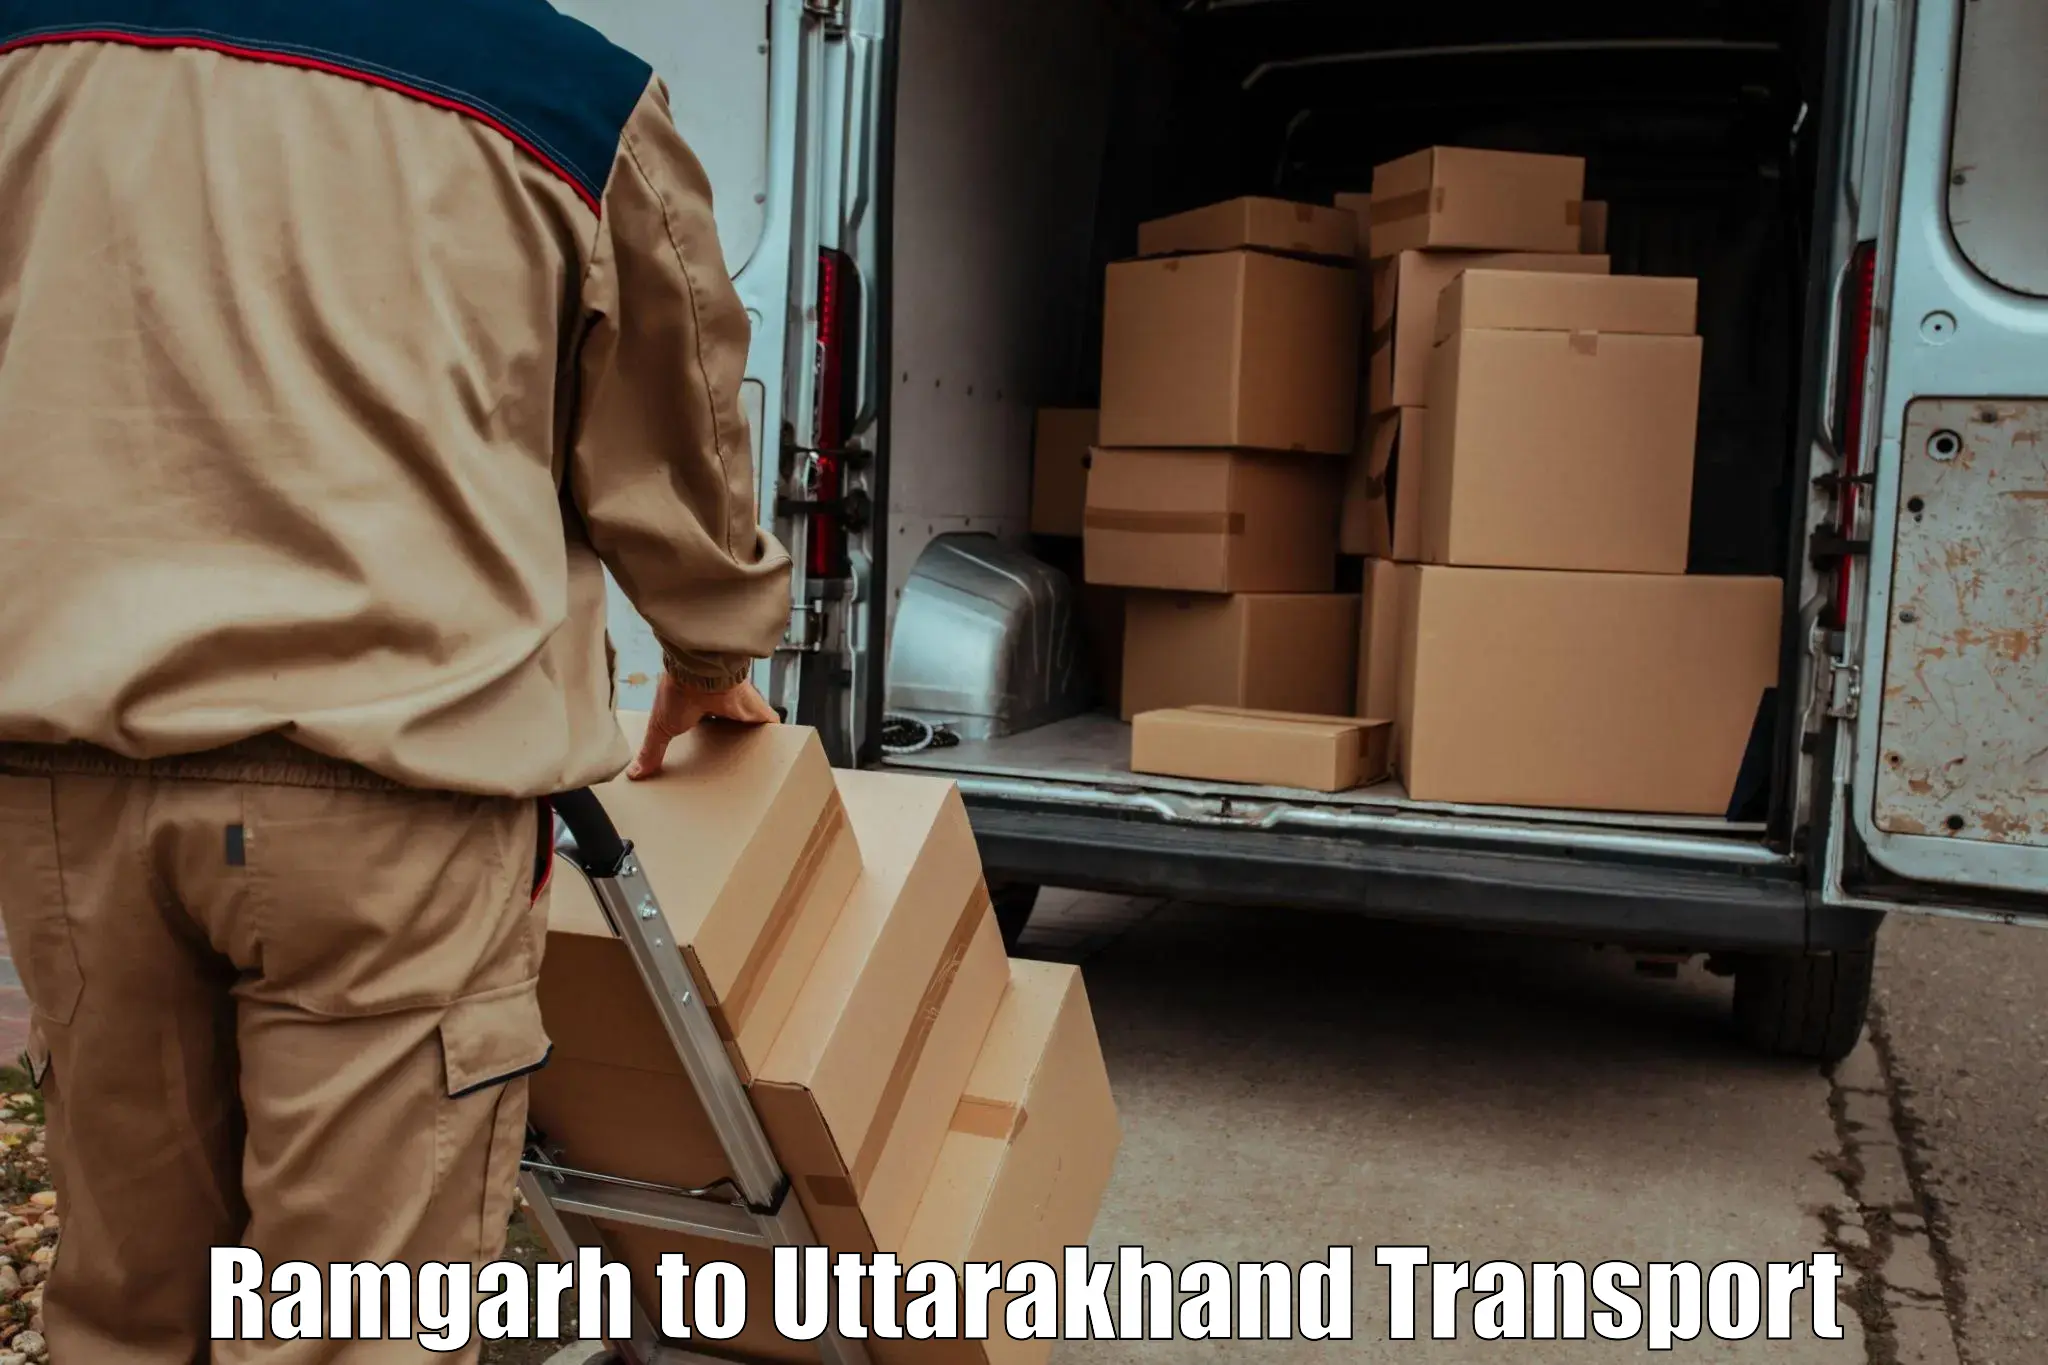 Daily parcel service transport Ramgarh to Lansdowne